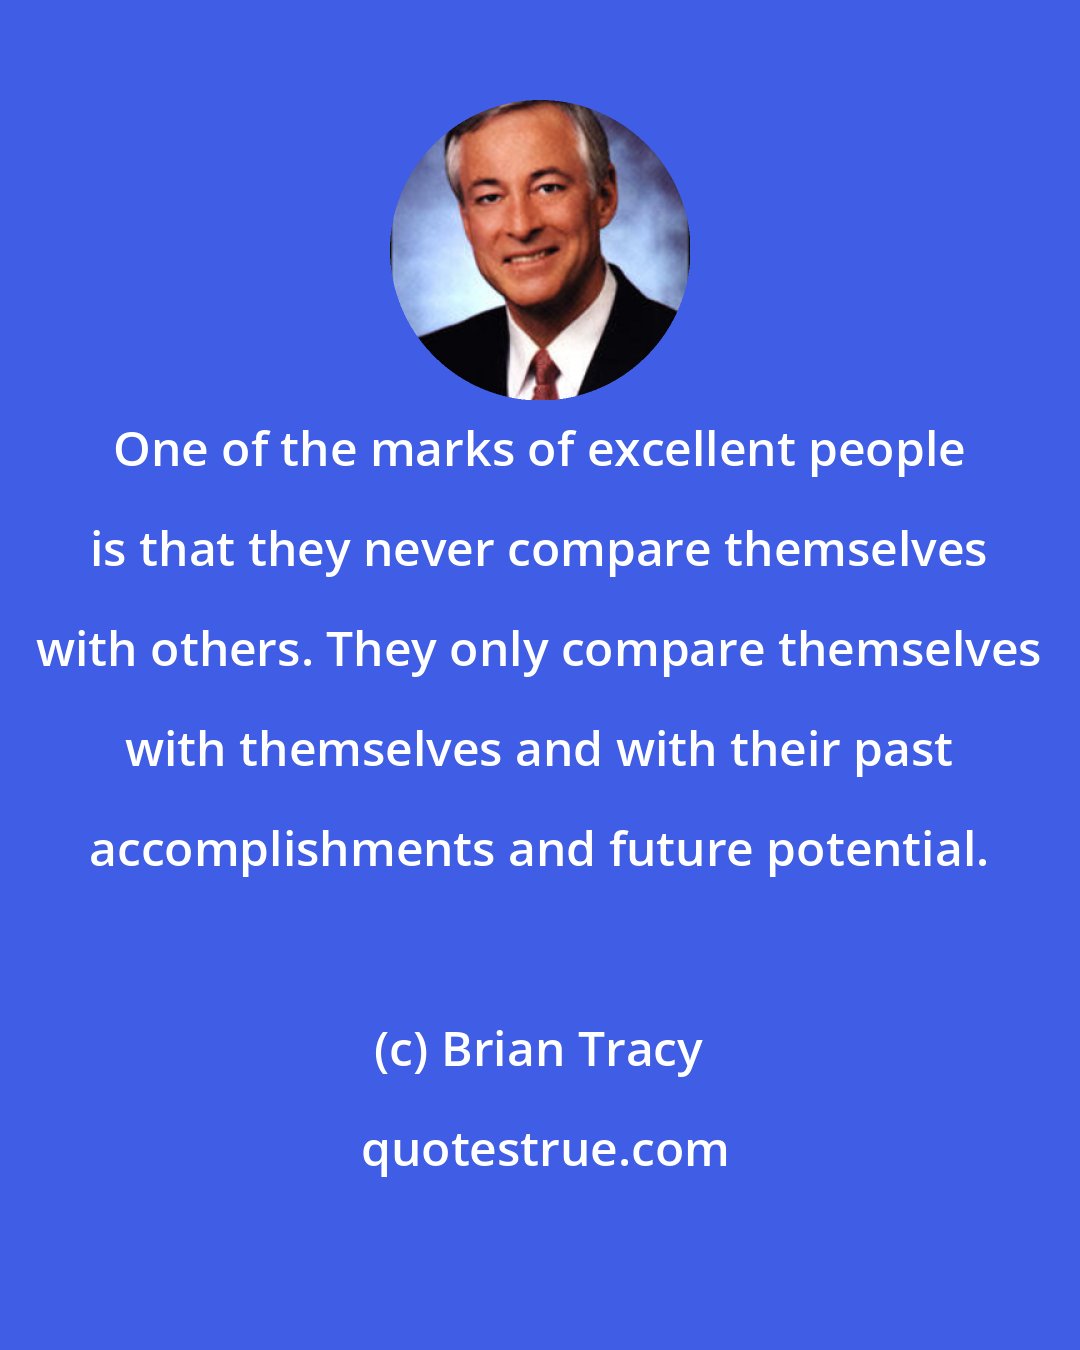 Brian Tracy: One of the marks of excellent people is that they never compare themselves with others. They only compare themselves with themselves and with their past accomplishments and future potential.